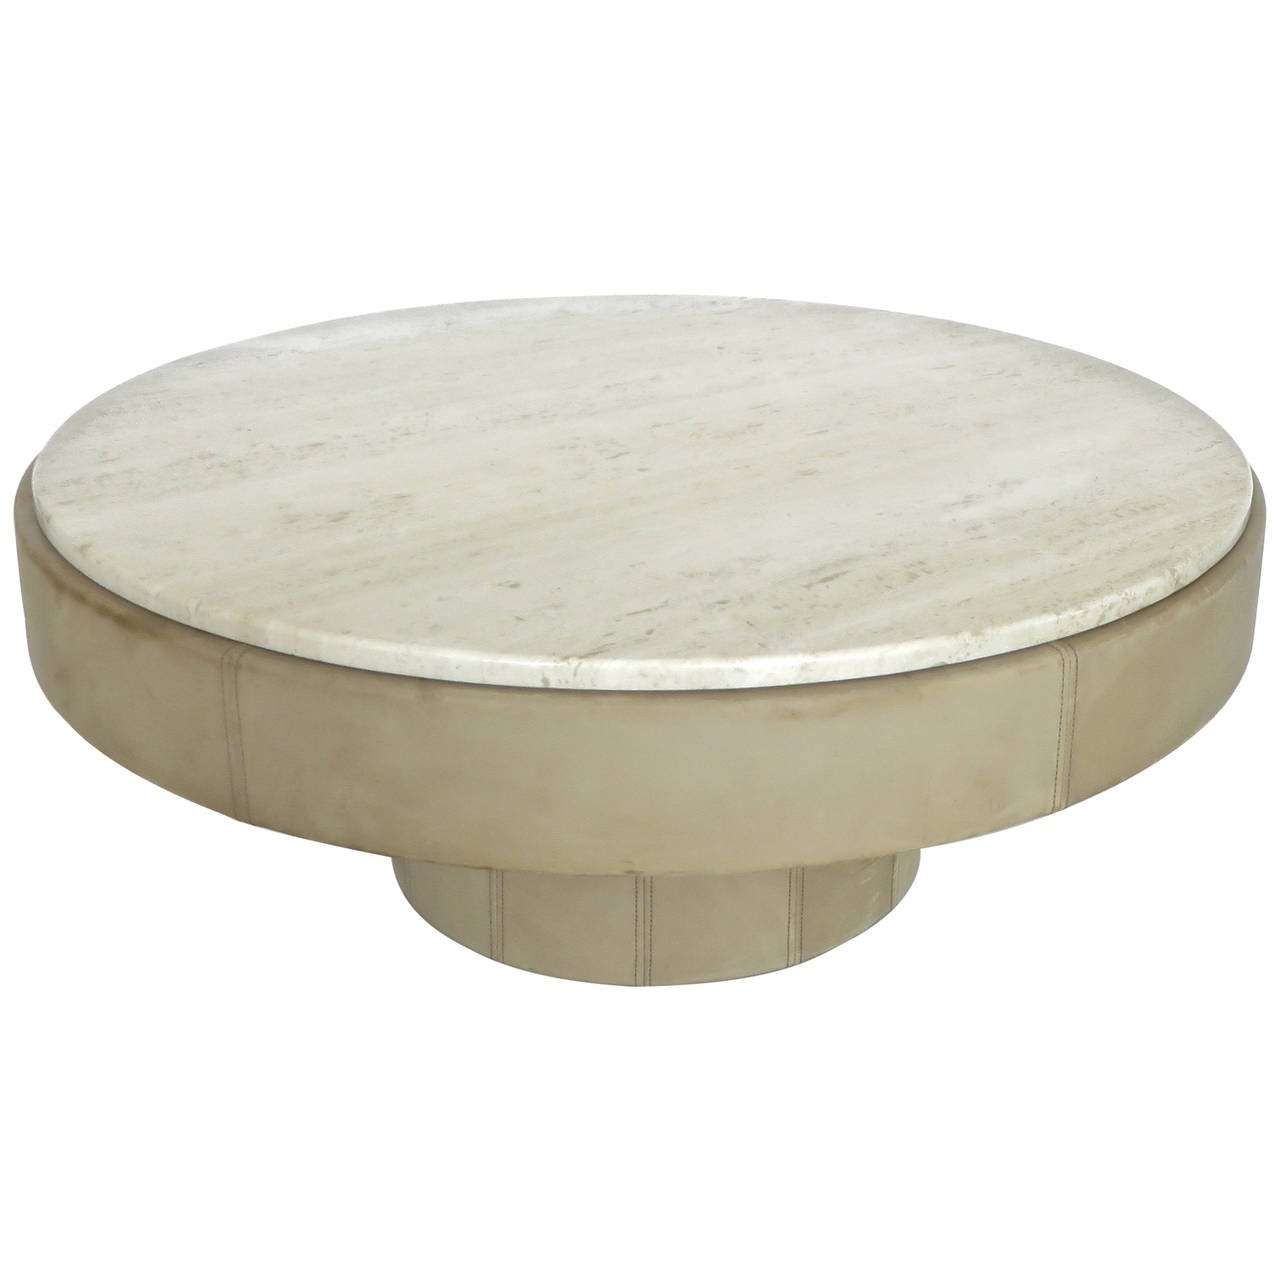 French Cream Leather And Travertine Marble Round Coffee Table At With Well Known Marble Round Coffee Tables (View 10 of 20)